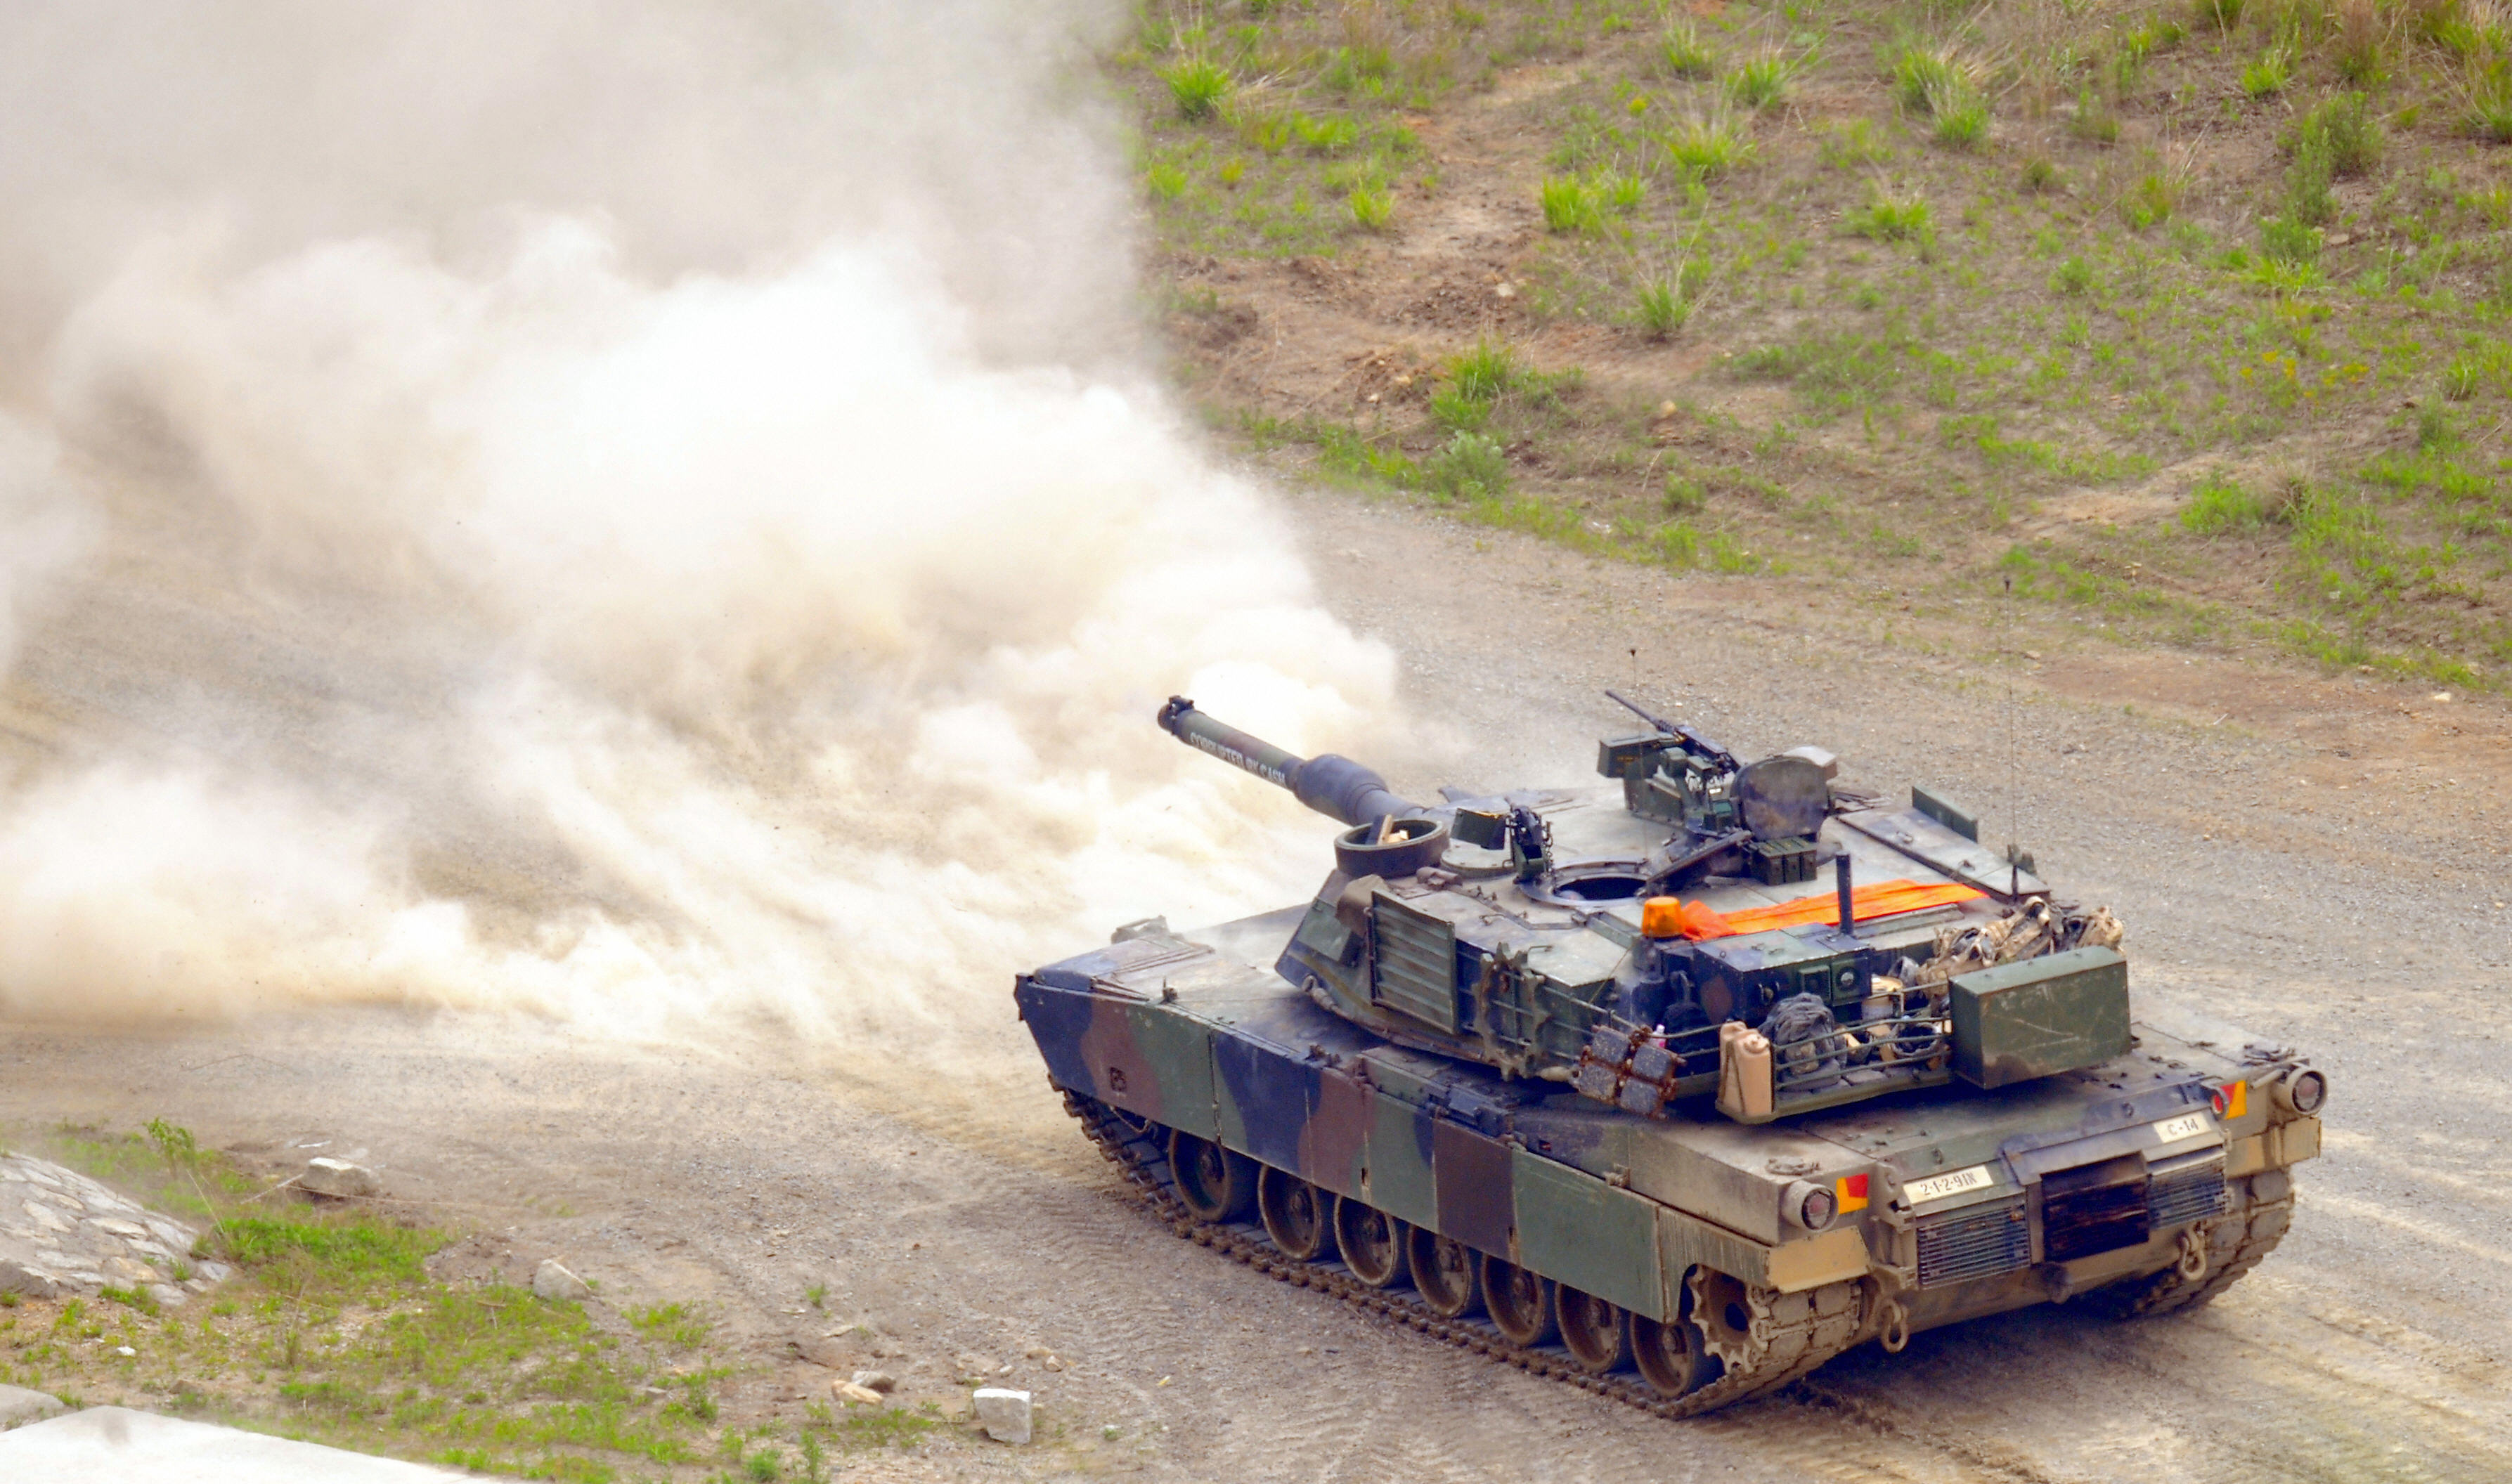 A US M1 tank fires during a joint milita